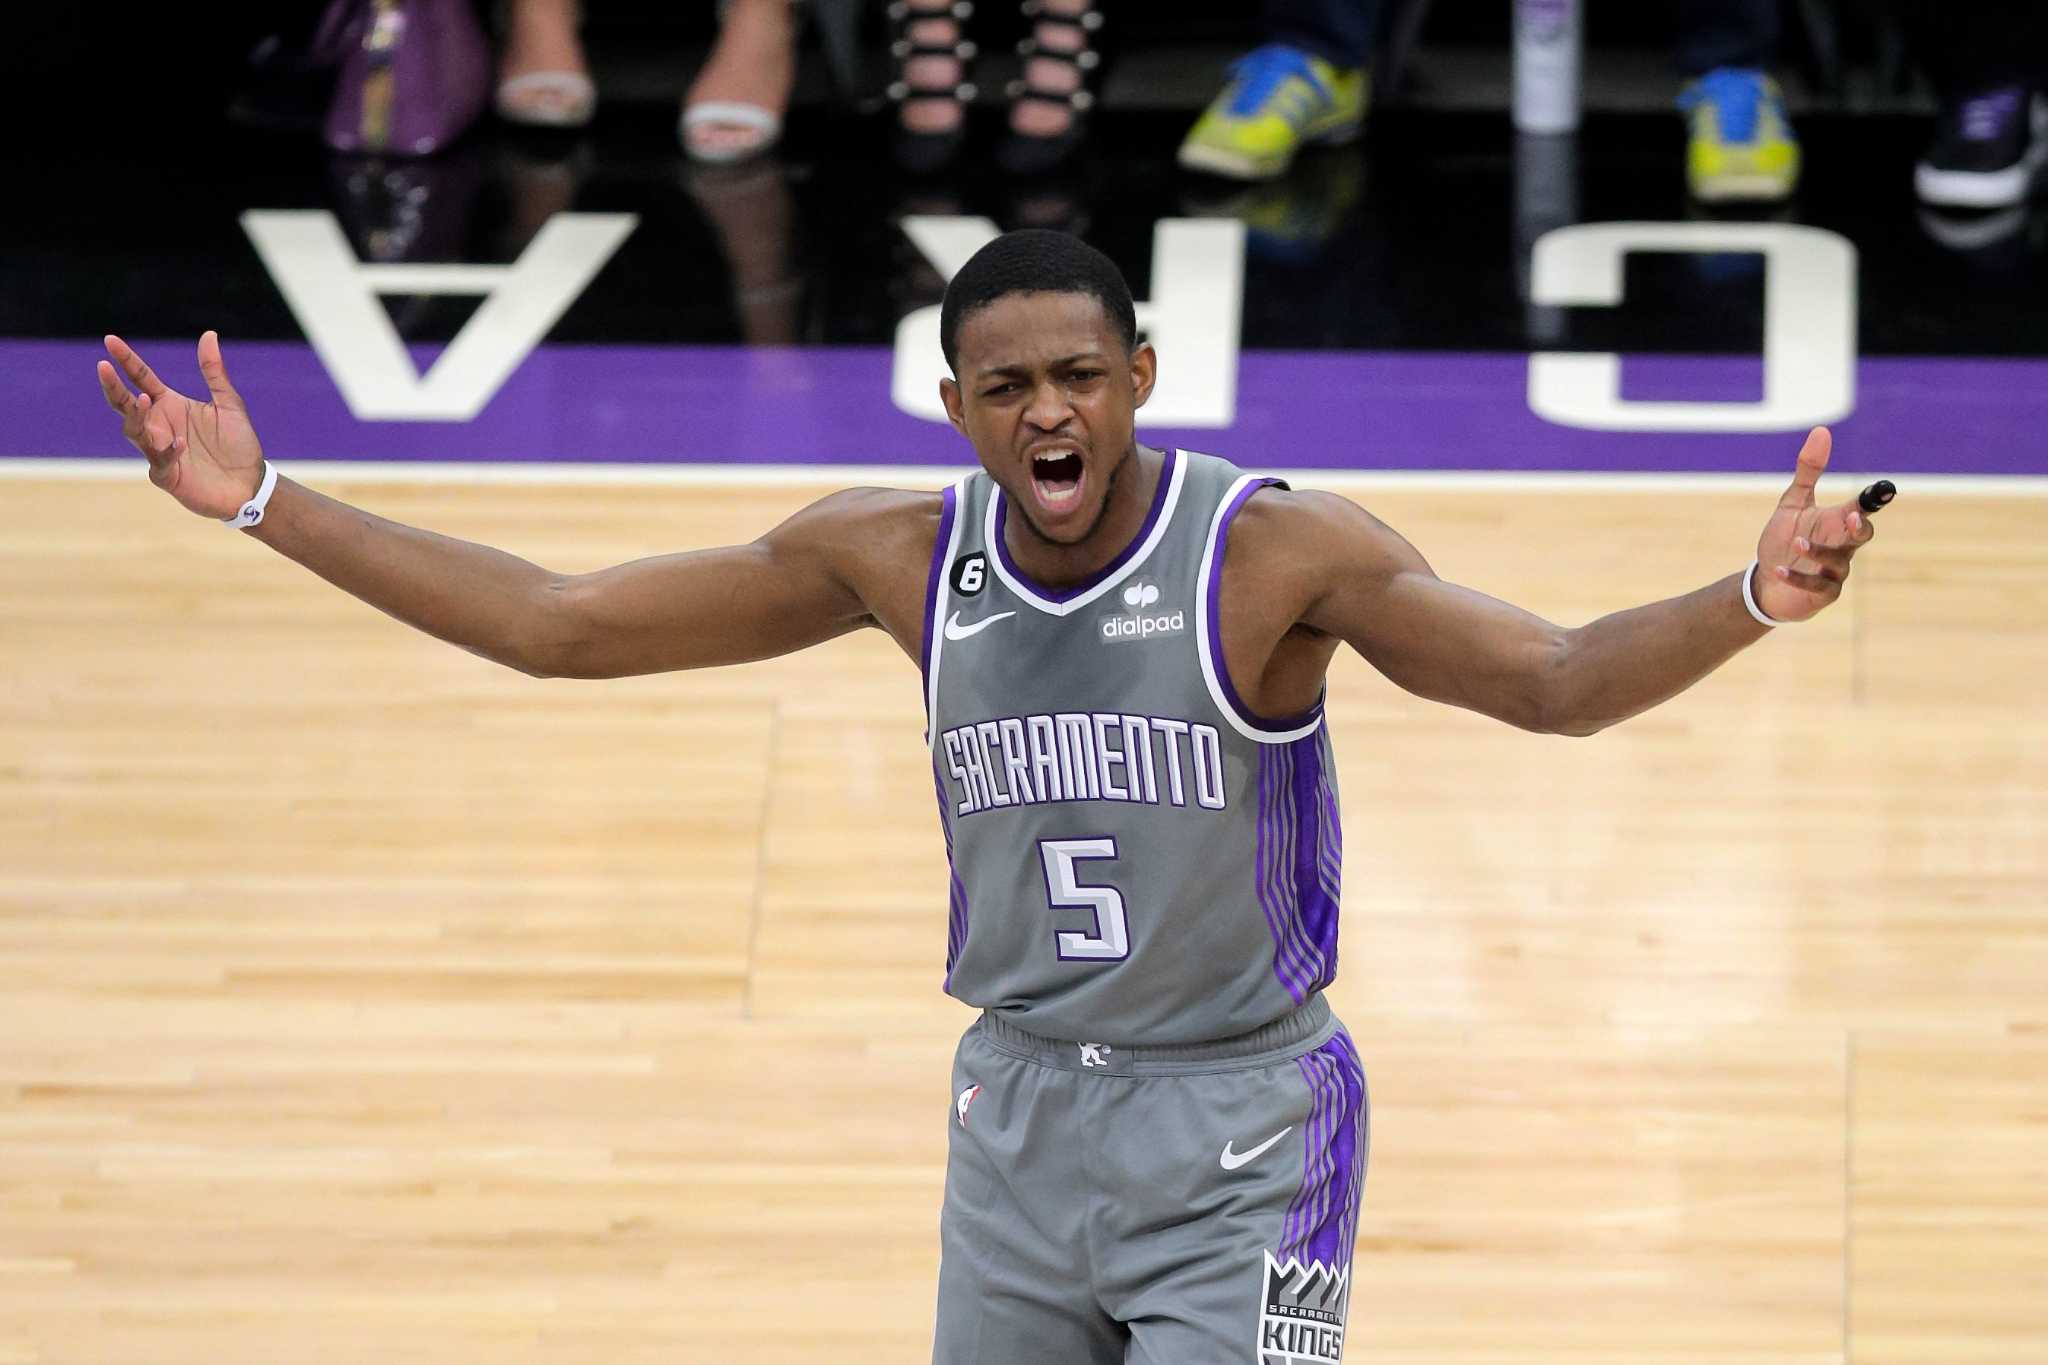 De'Aaron Fox on Game 5: 'No ifs, ands or buts. I'm playing